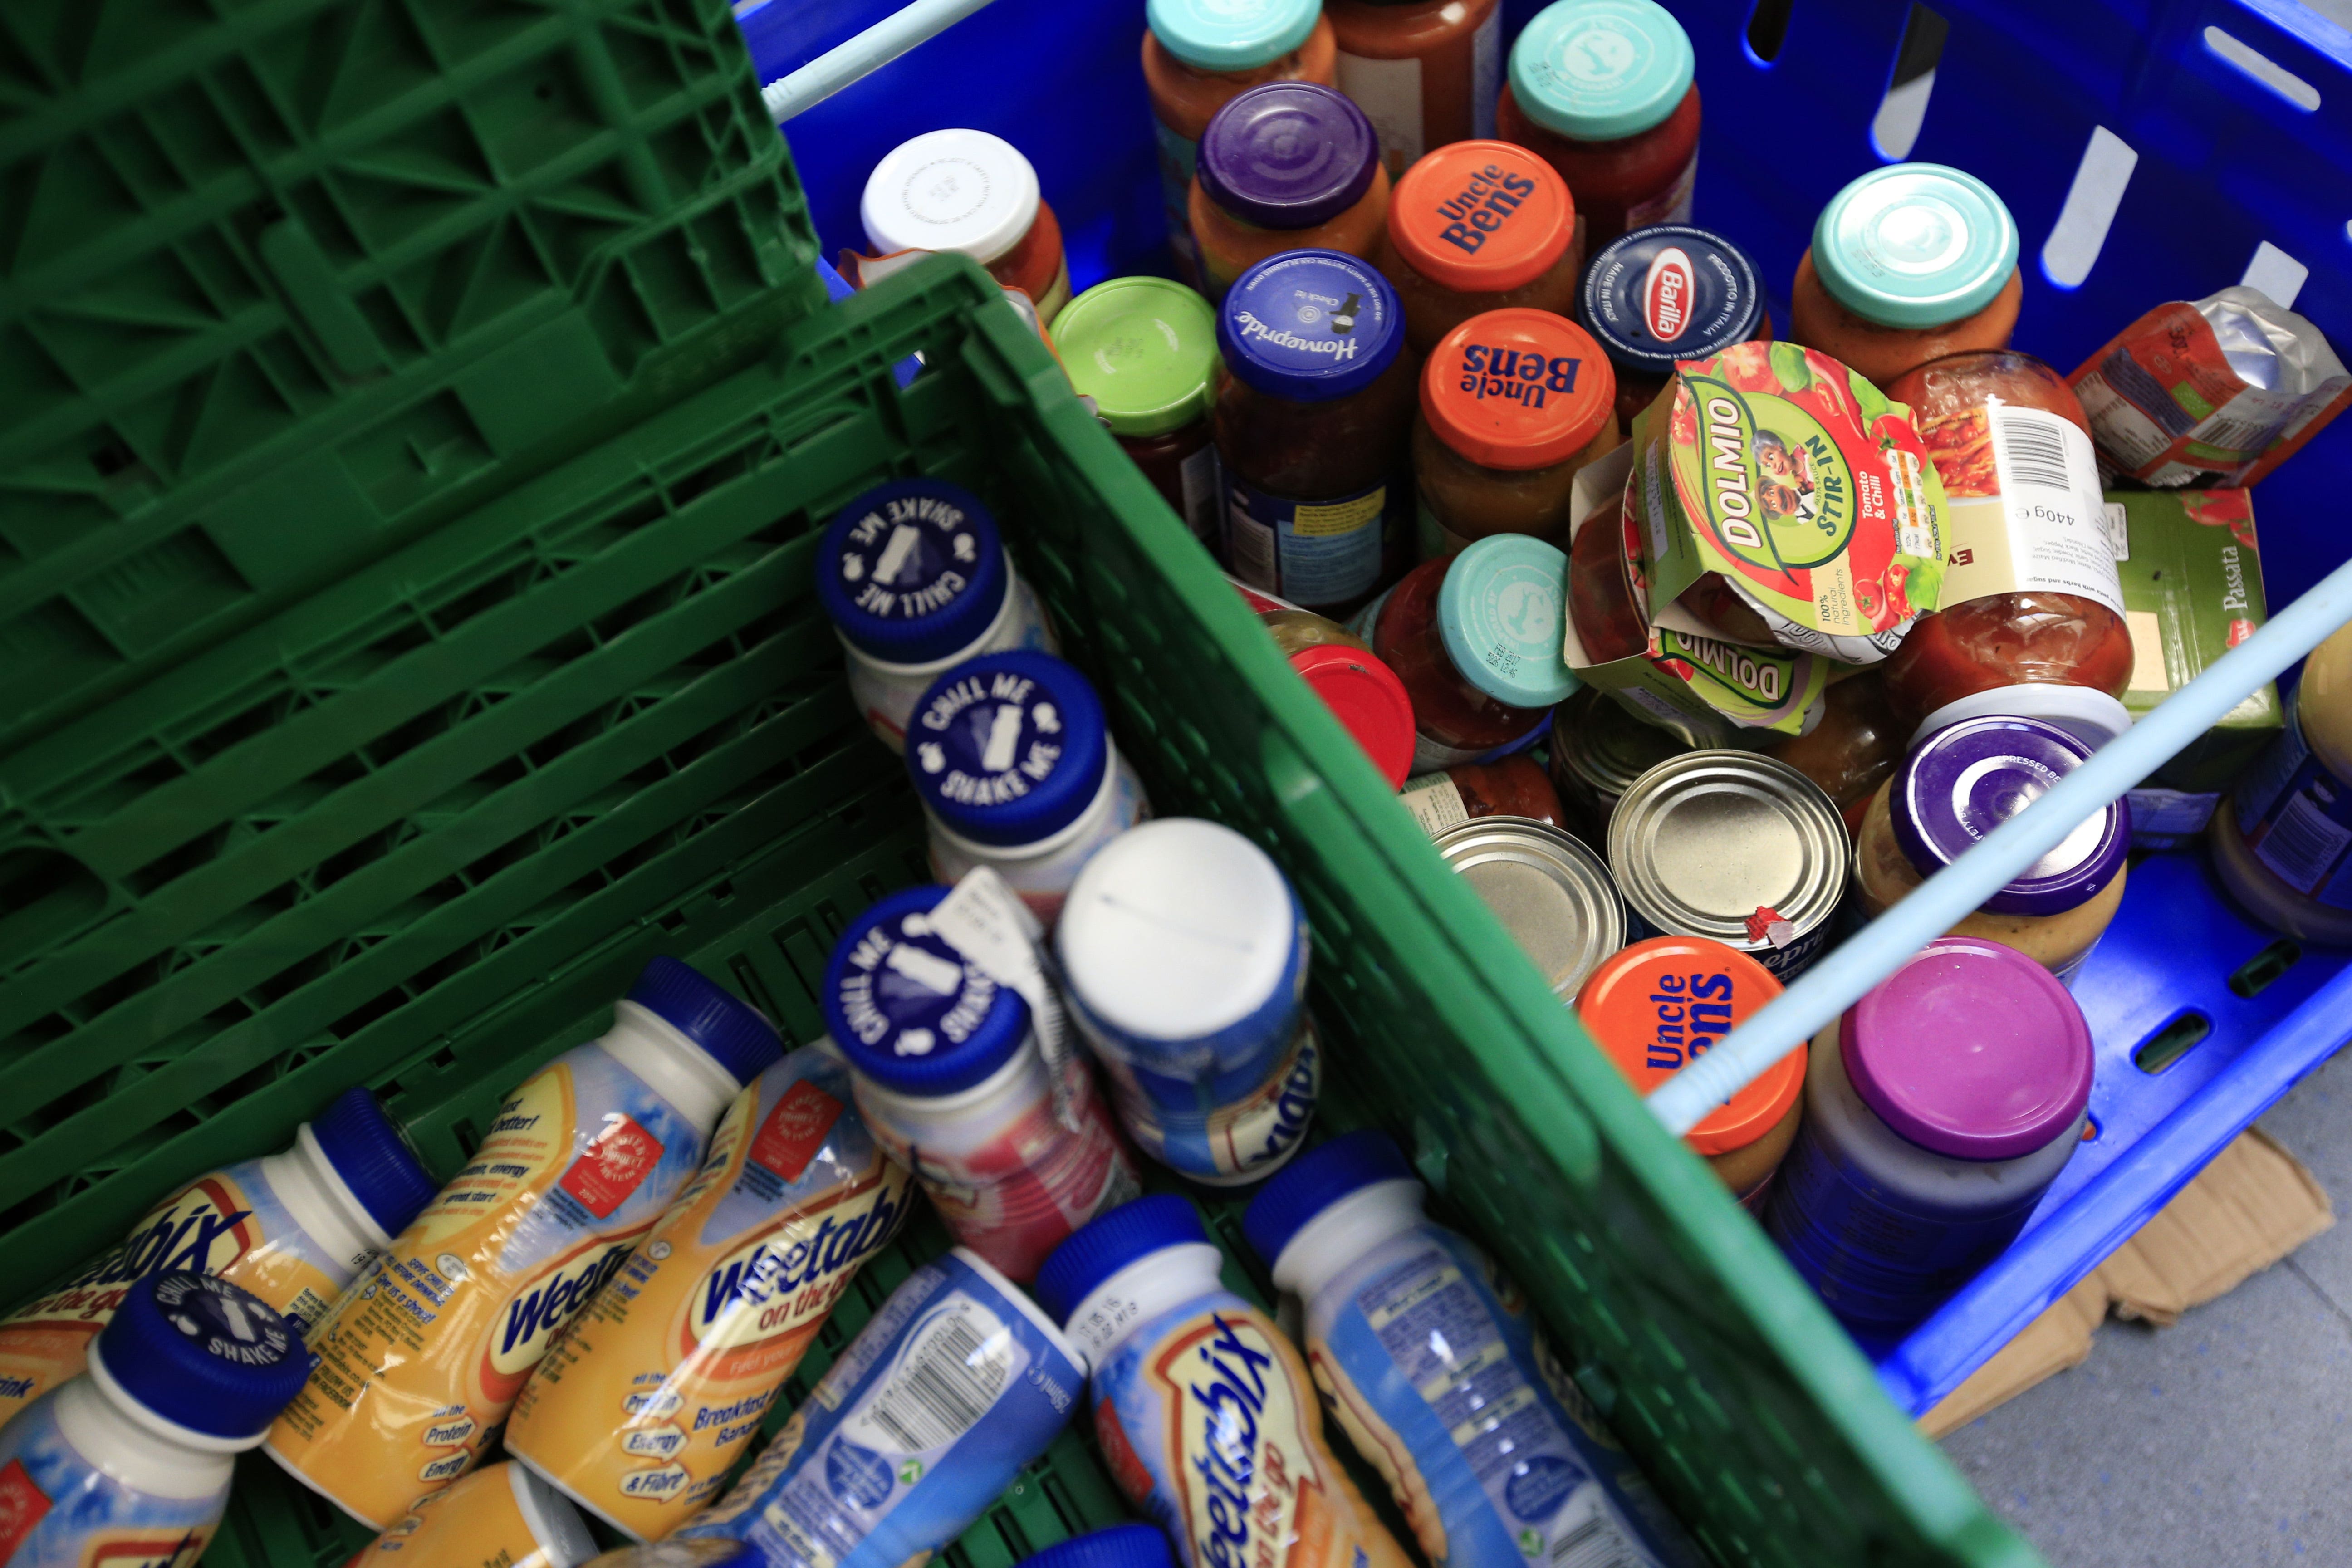 More than 320,000 people in the UK have needed to use a food bank for the first time in the last six months